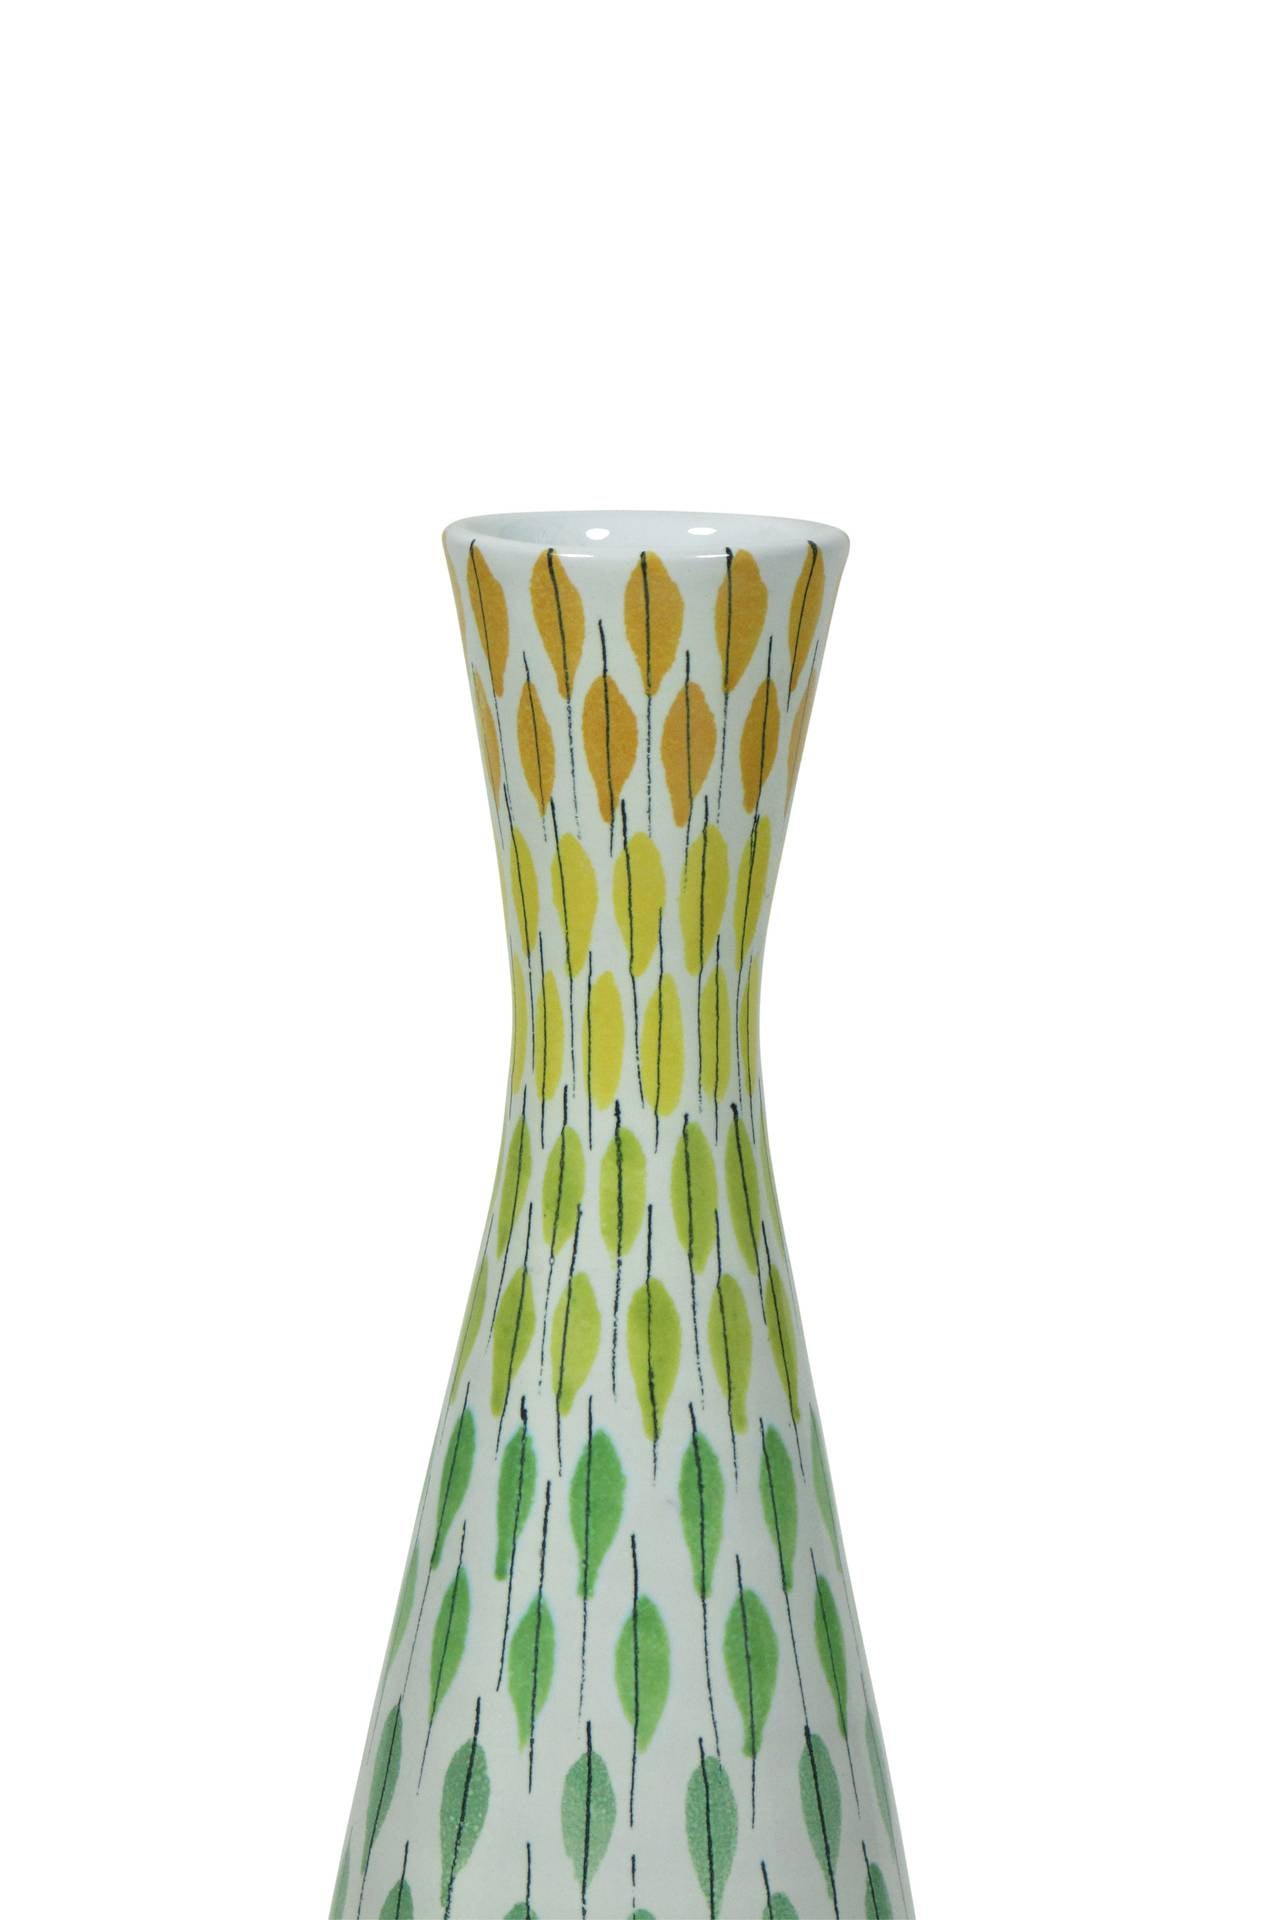 Italian Tall Tapered Multi-colored Ceramic Vase by Raymor